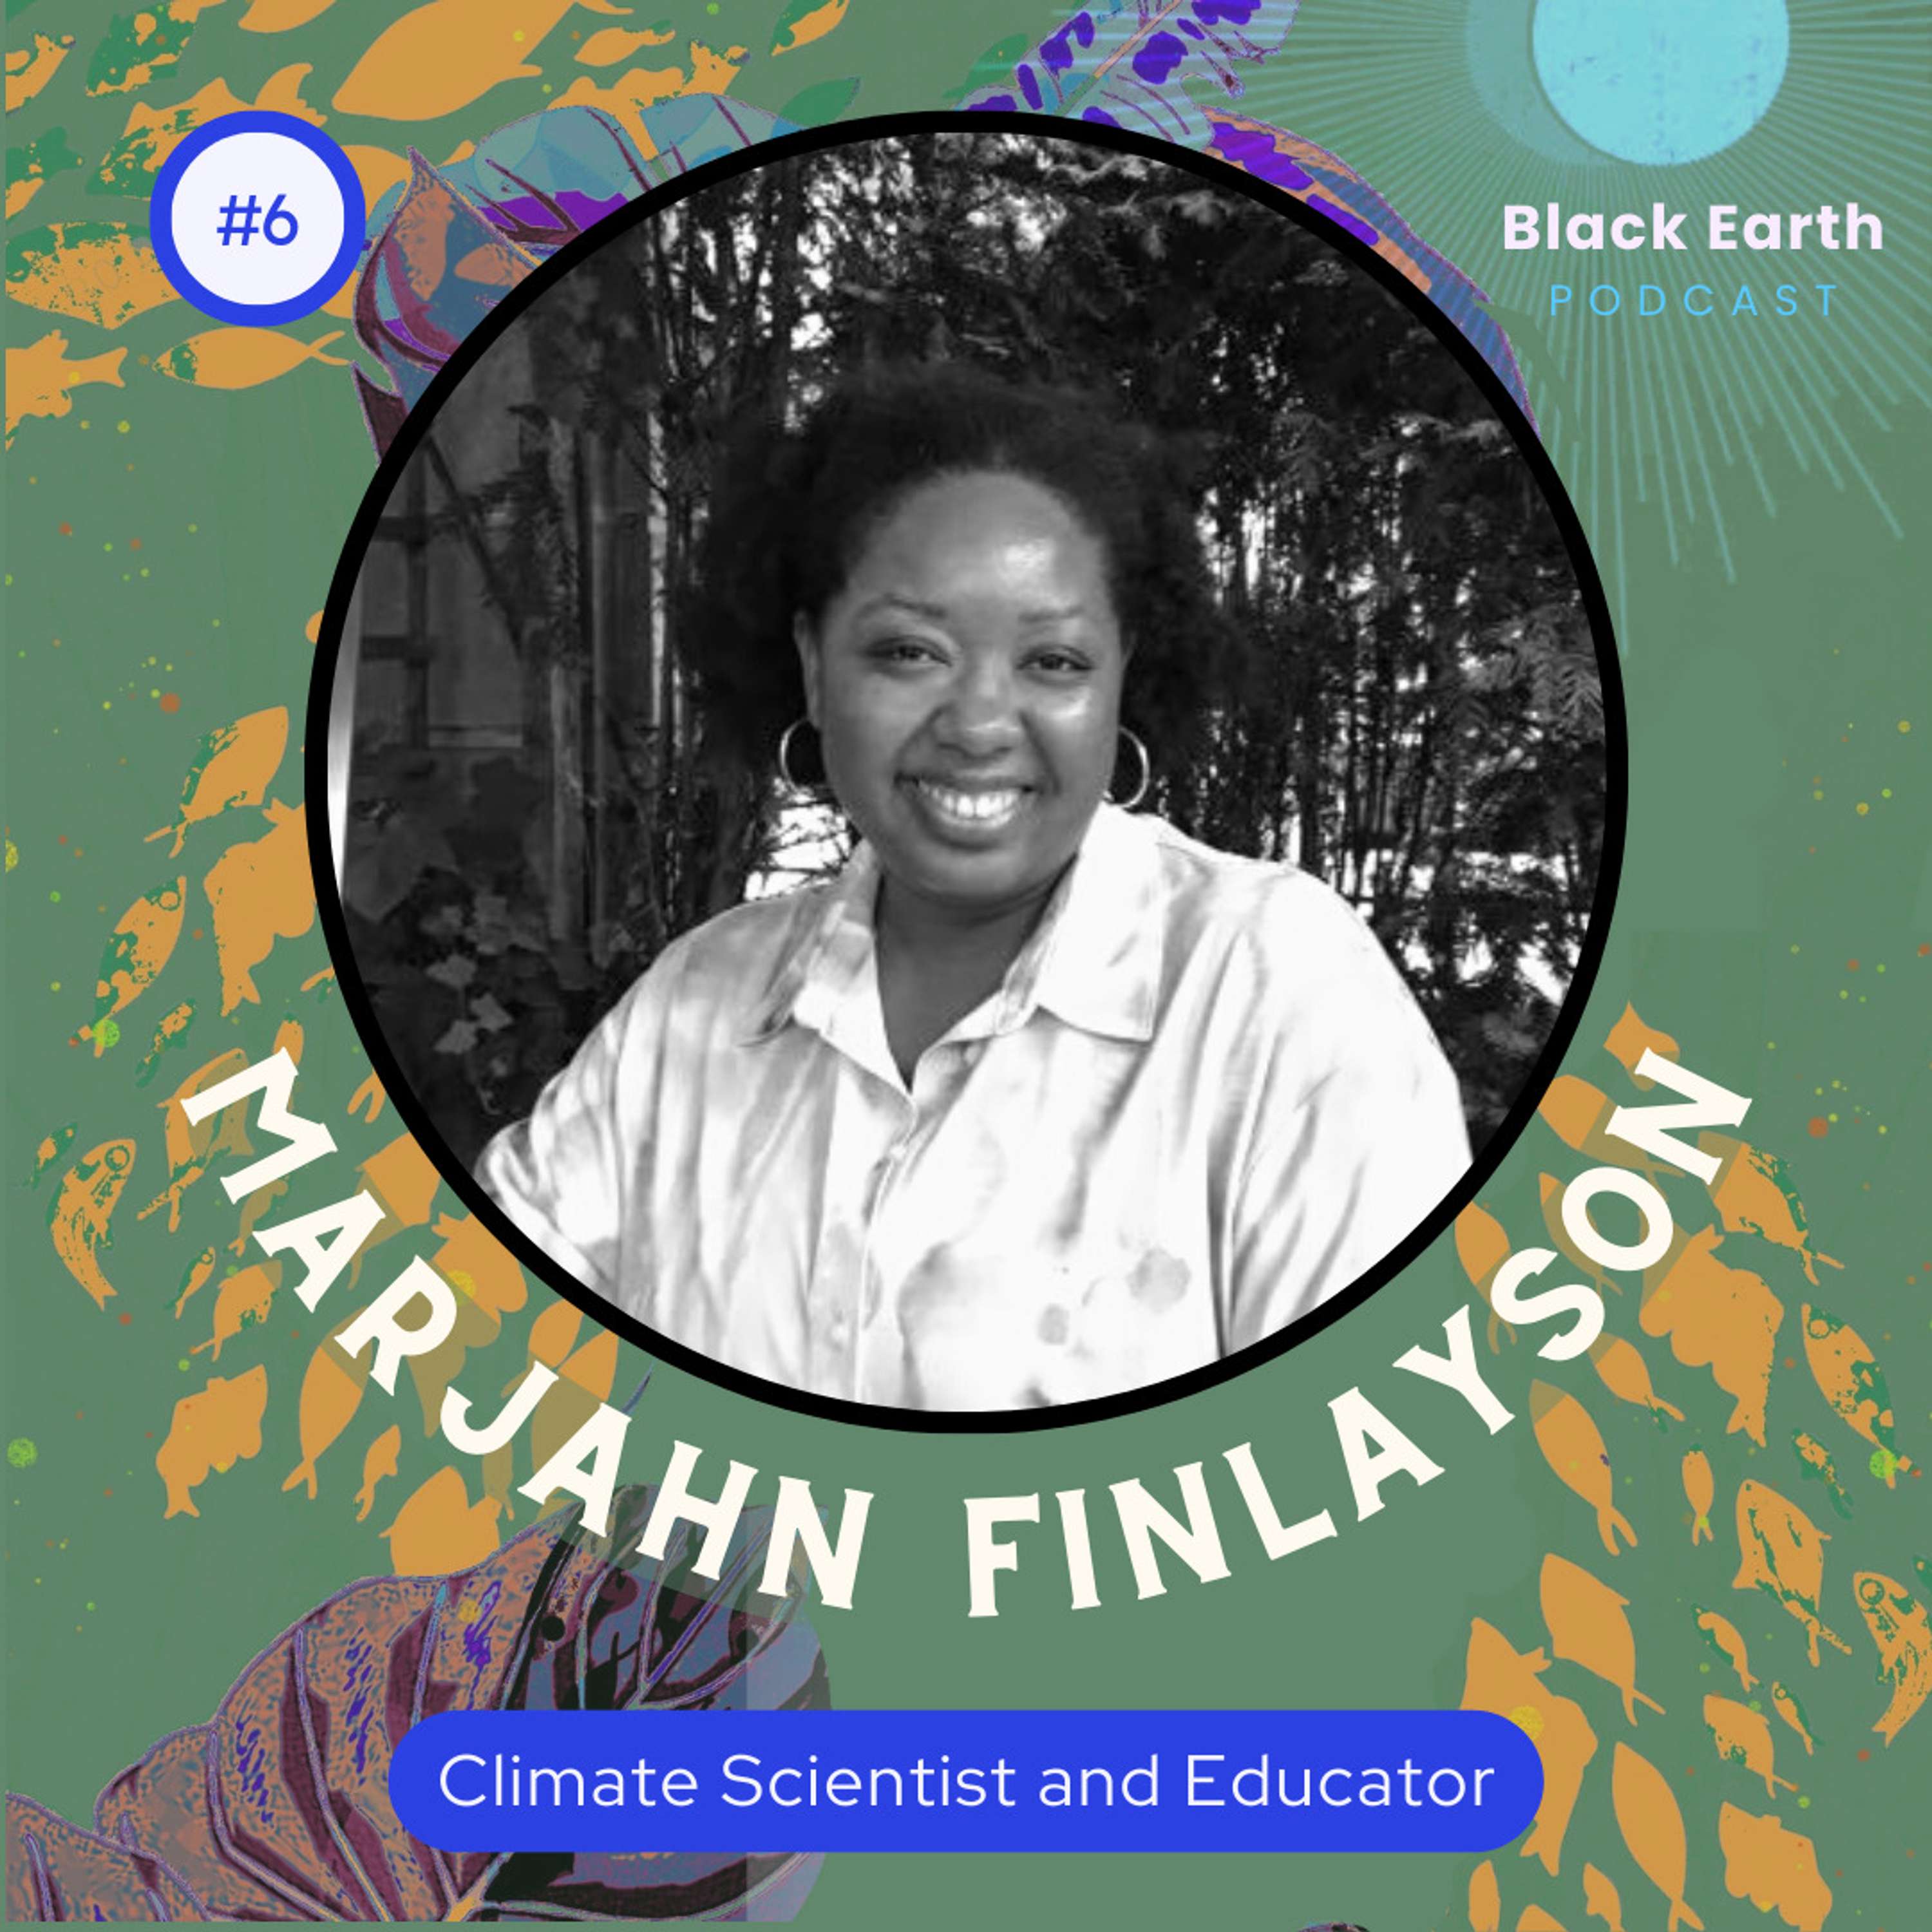 Hurricanes and climate justice in the Caribbean with Marjahn Finlayson